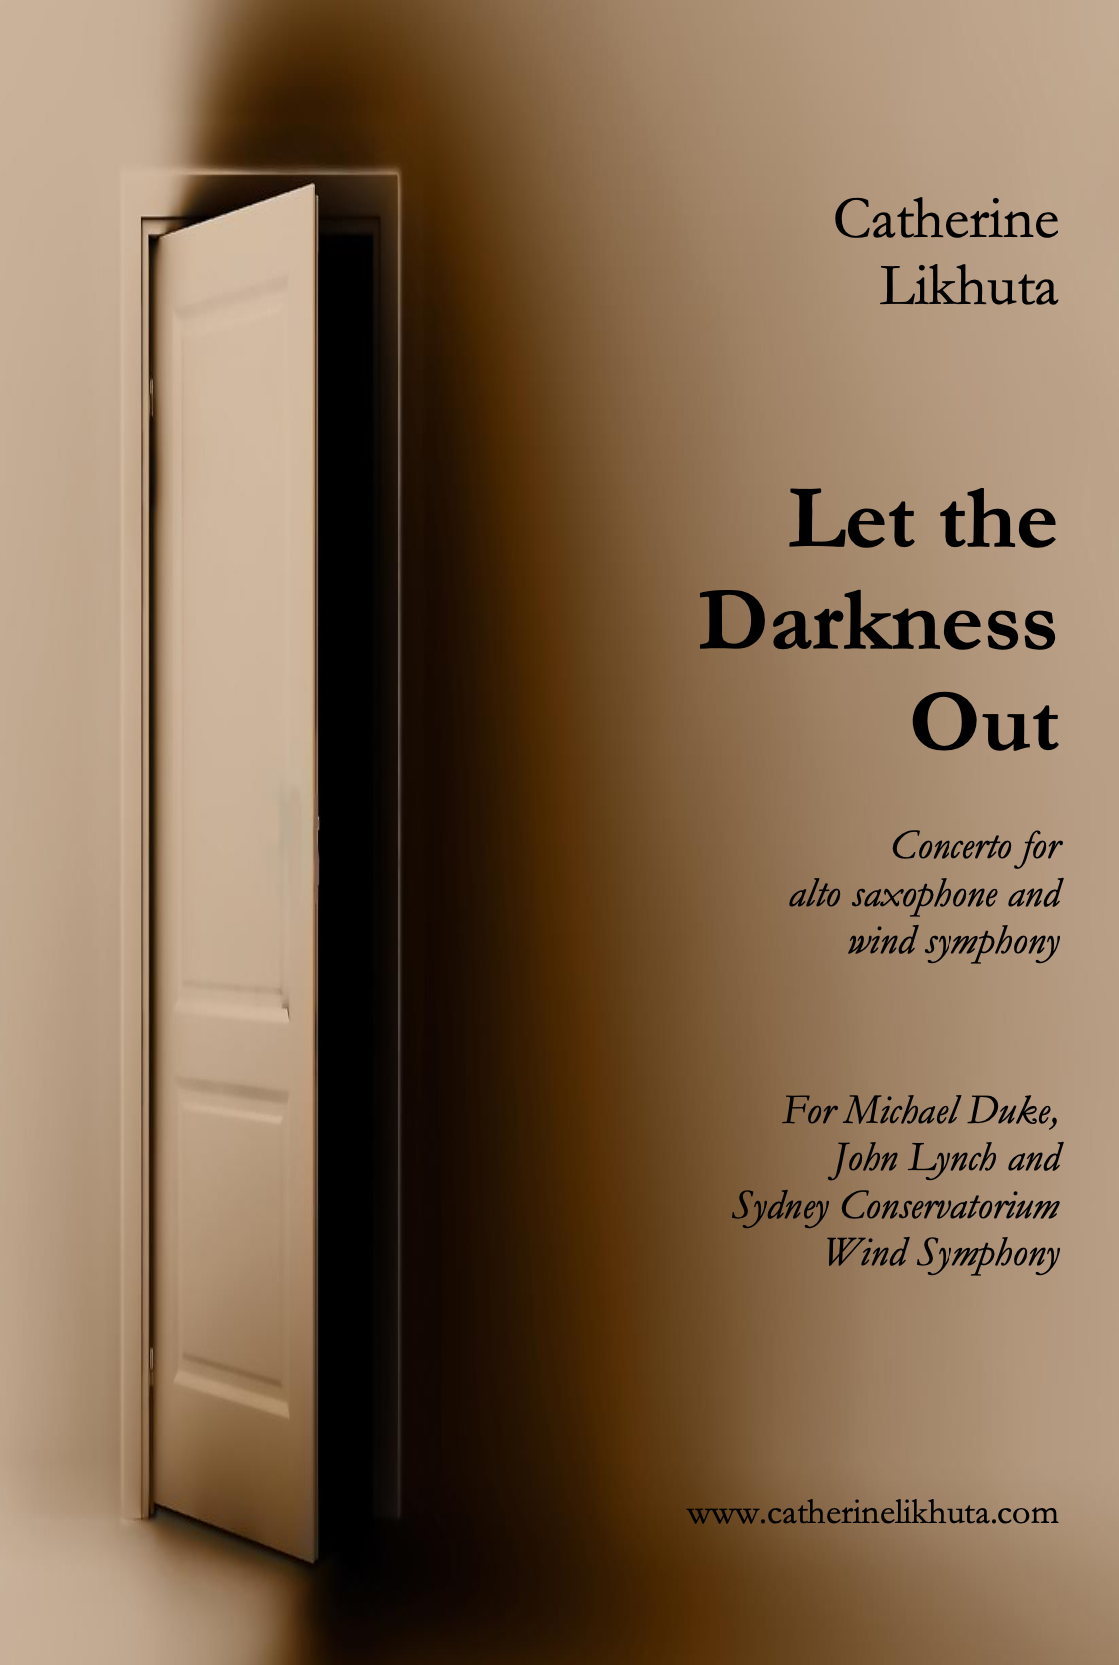 Let The Darkness Out (Full Concerto) by Catherine Likhuta